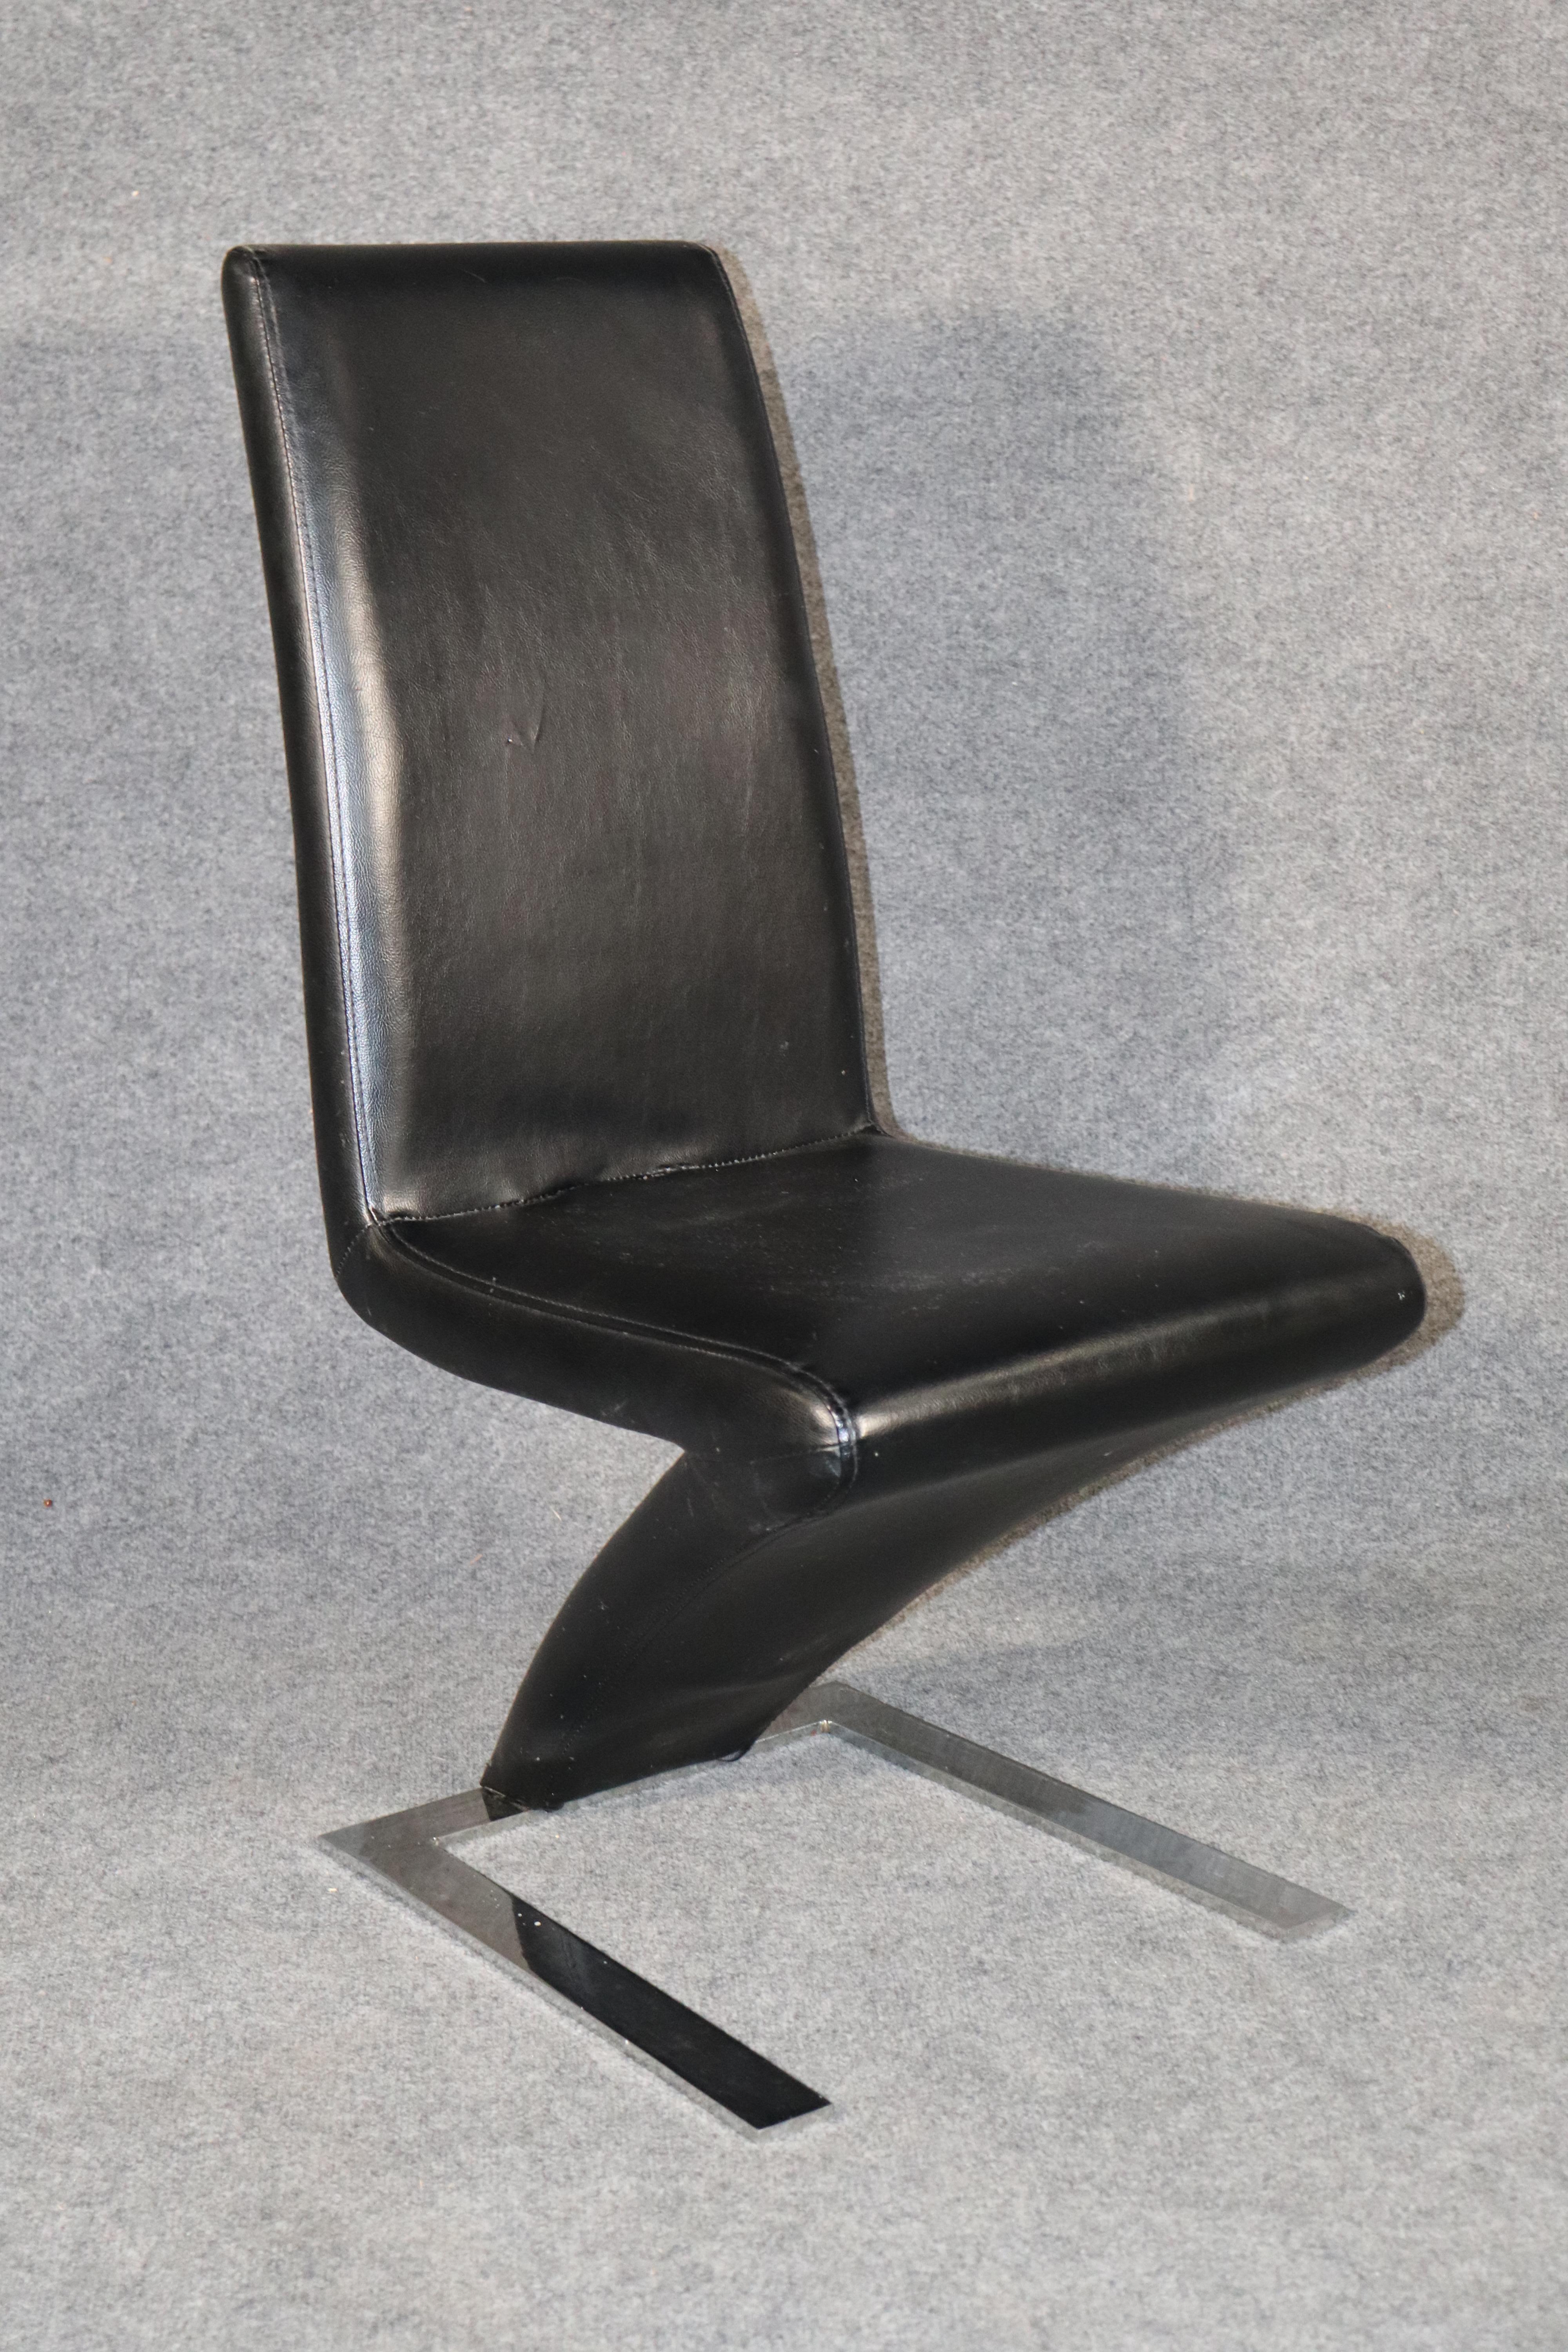 Modern dining chairs with a Z shape leather seat, set on chrome metal base.
Please confirm location.